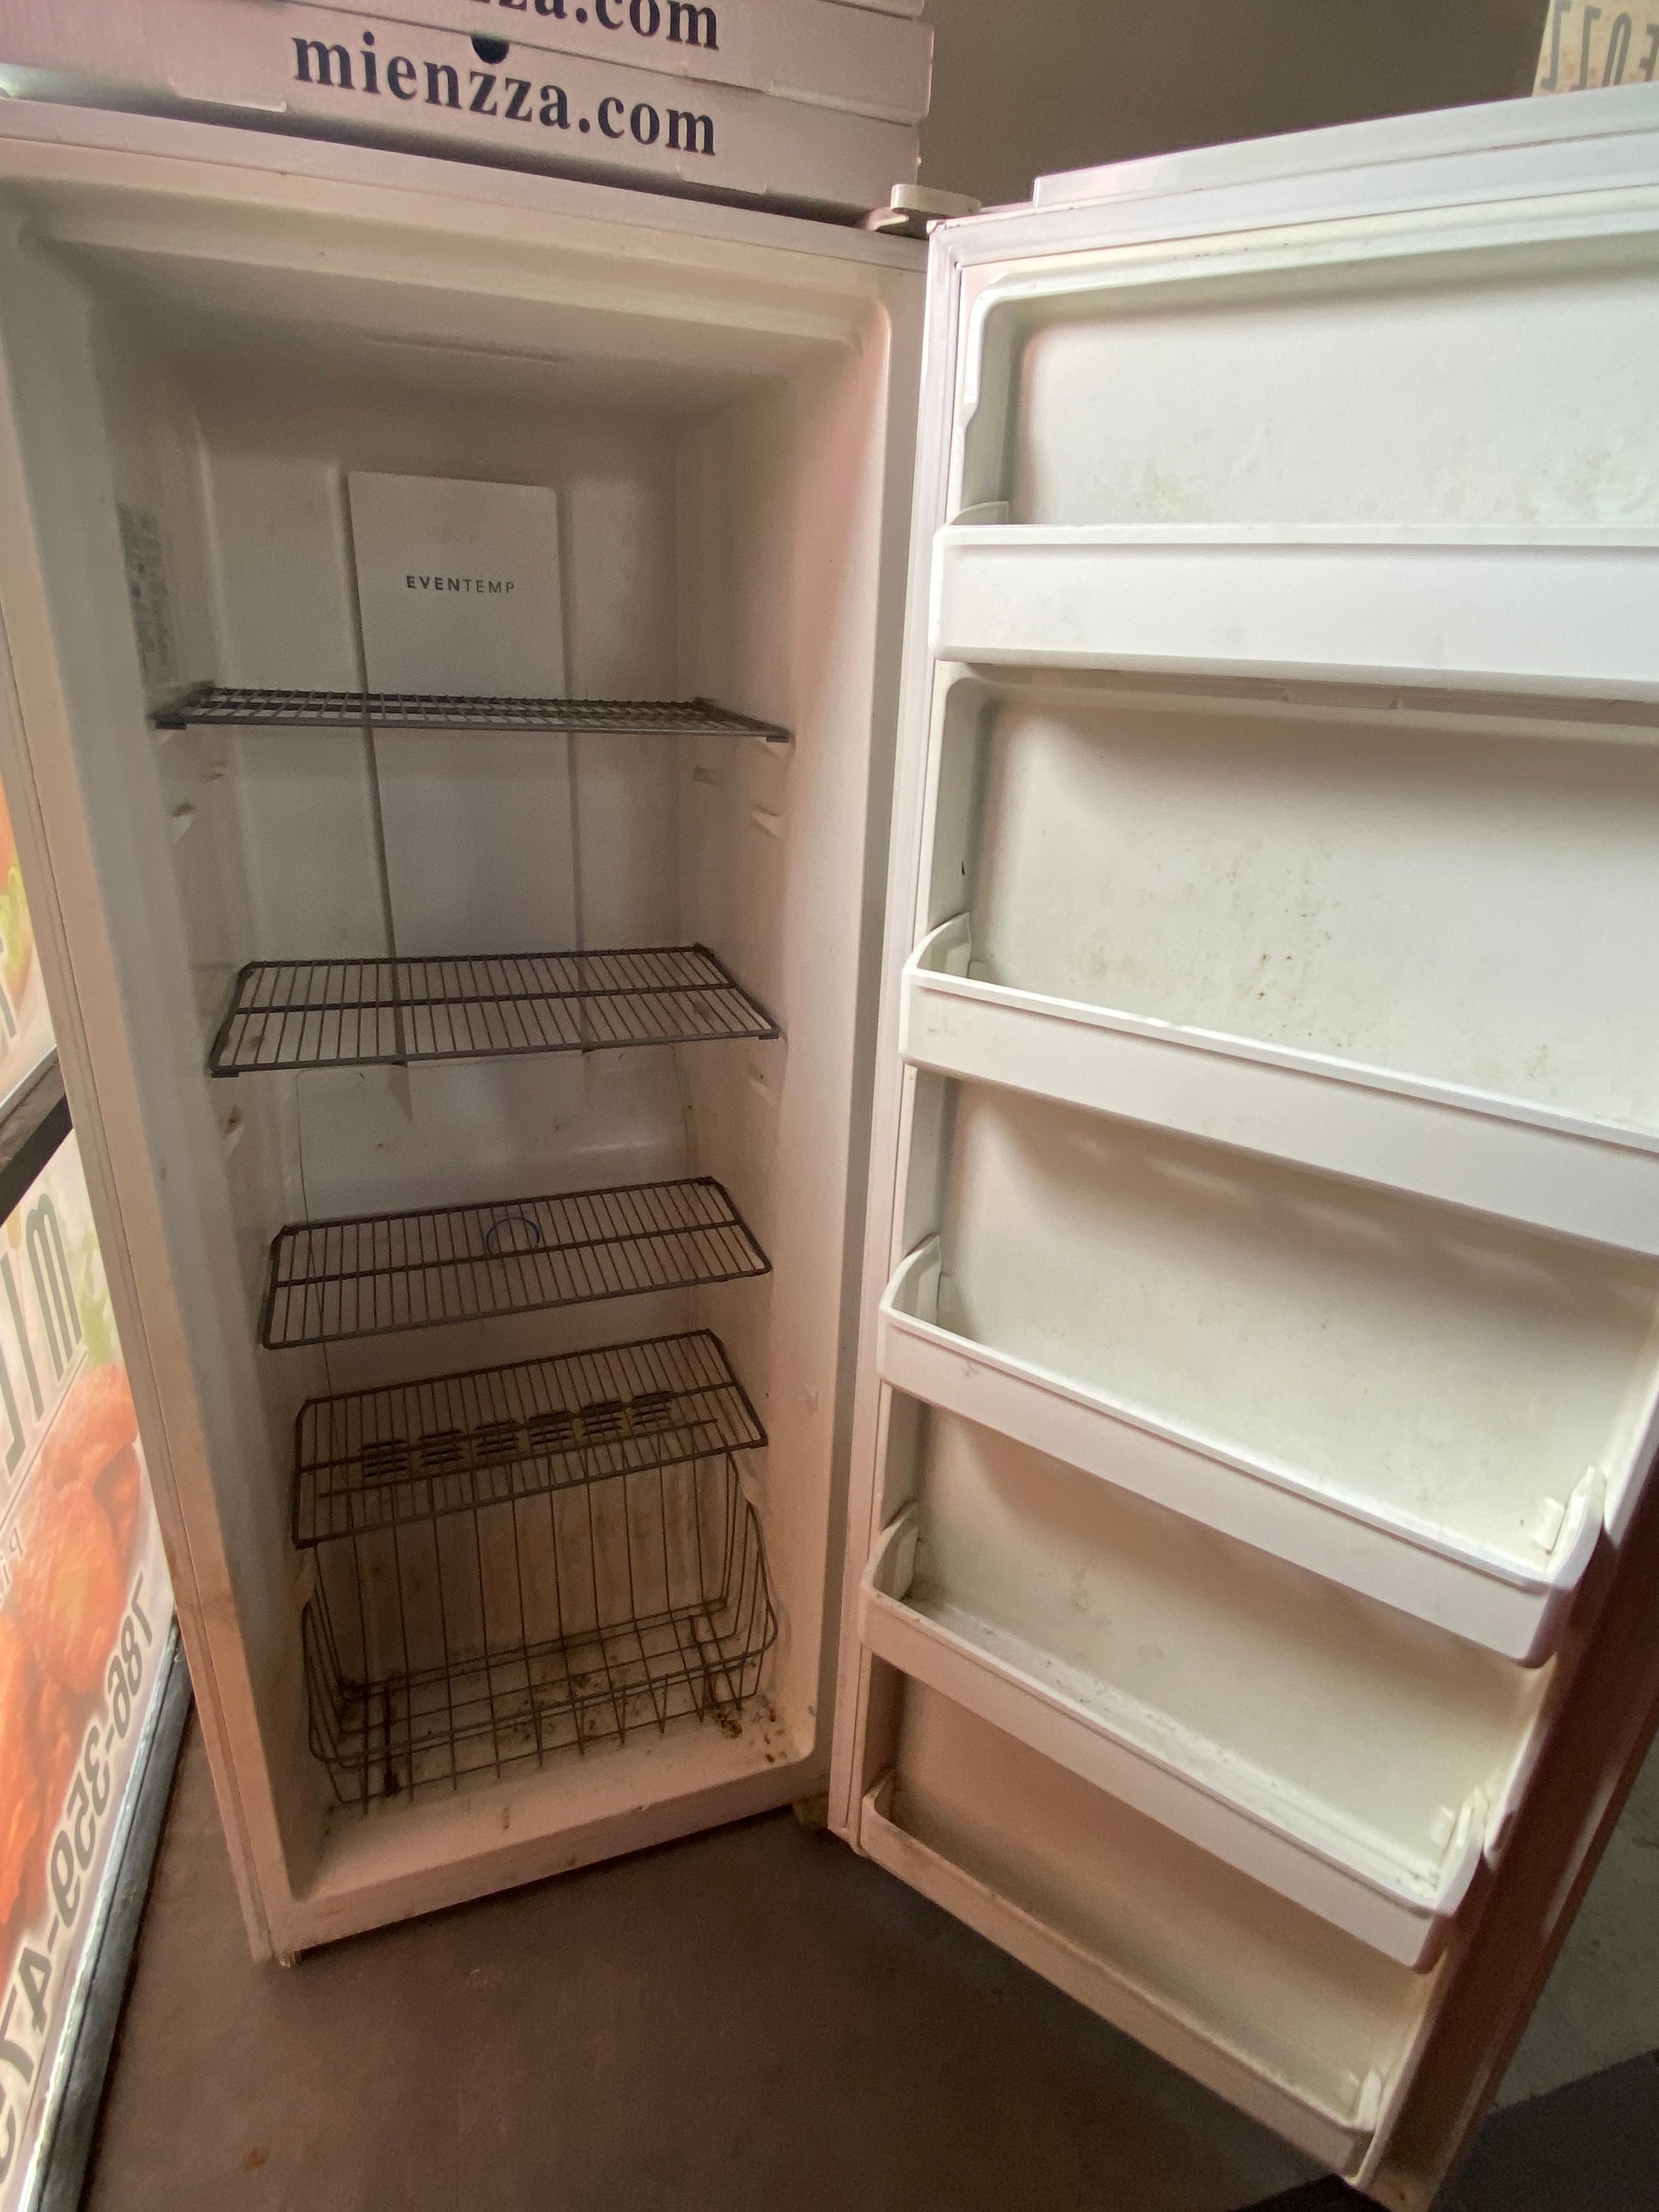 Single door, Frigid Air Freezer with four adjustable, height, epoxy coated shelves, and product bask